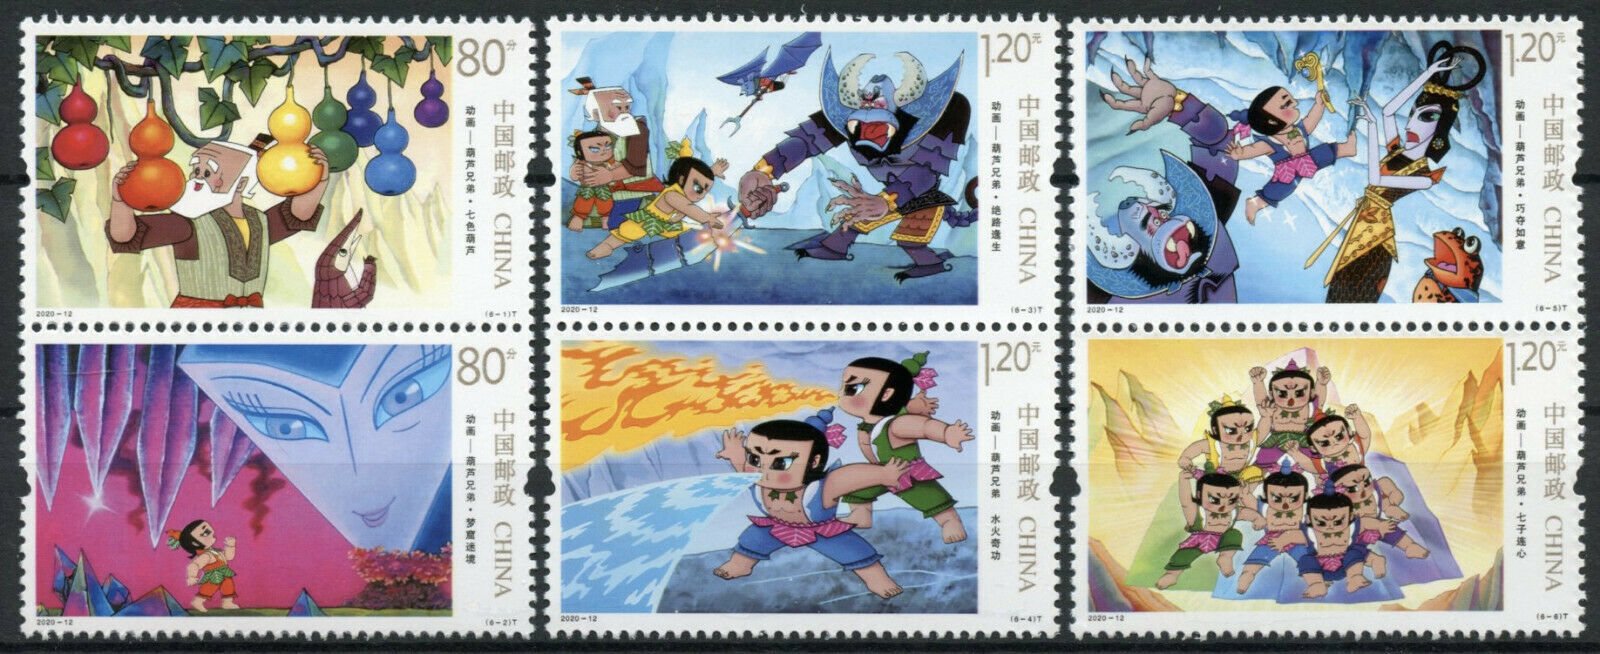 China Cartoons Stamps 2020 MNH Calabash Bros Brothers Animation 6v Set in Pairs